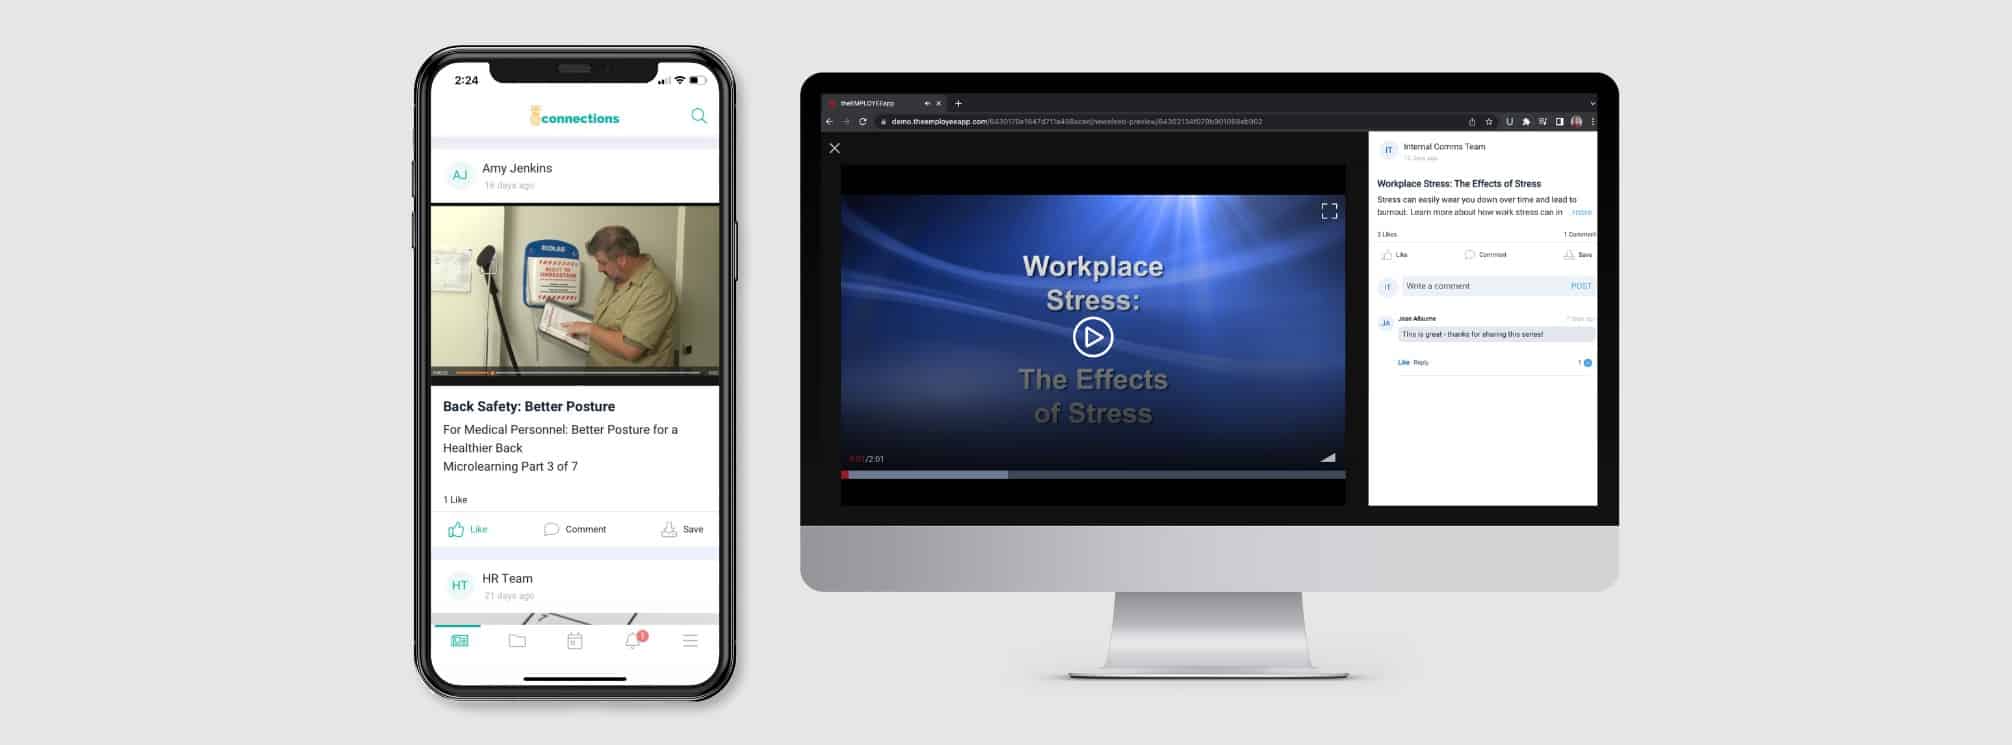 microlearning example on theEMPLOYEEapp mobile app and intranet platforms